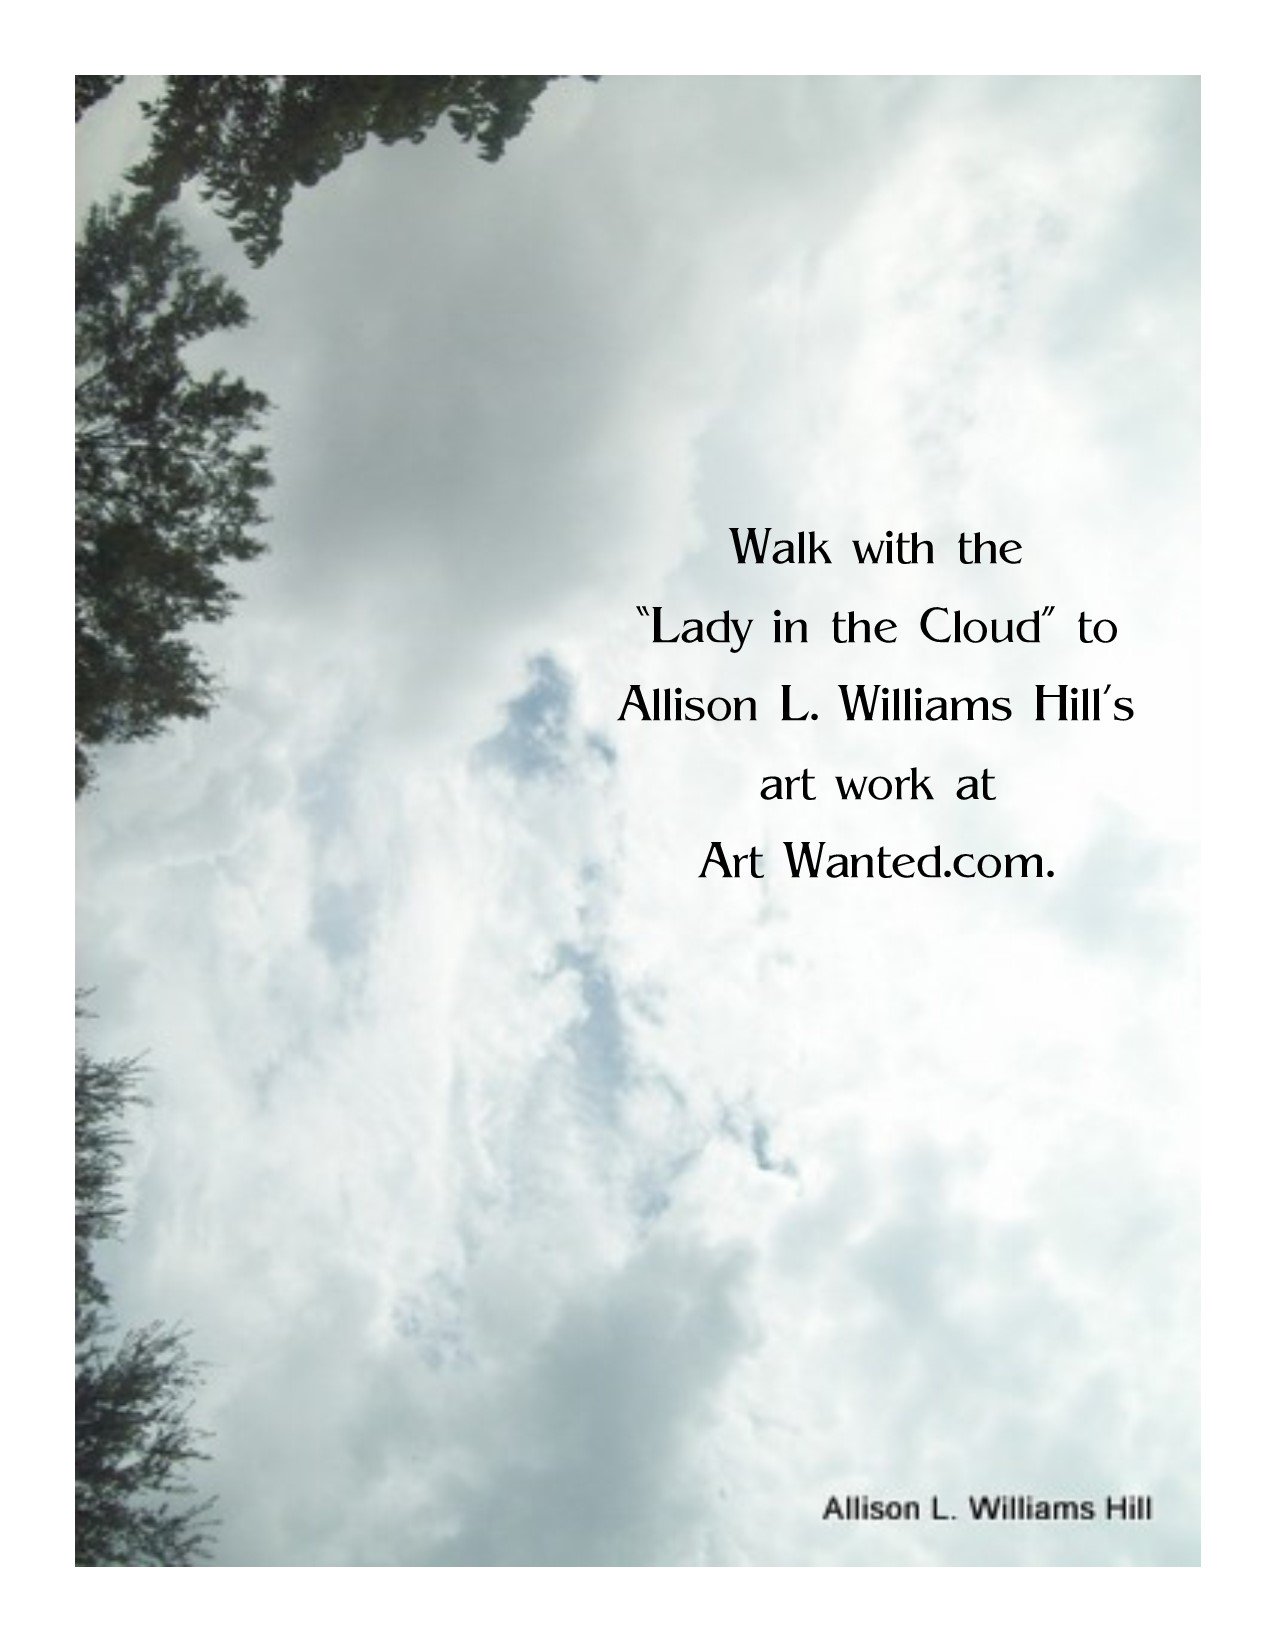 Lady-in-the-Cloud-Art-Wanted.com-Poster-Allison-L-Williams-Hill 